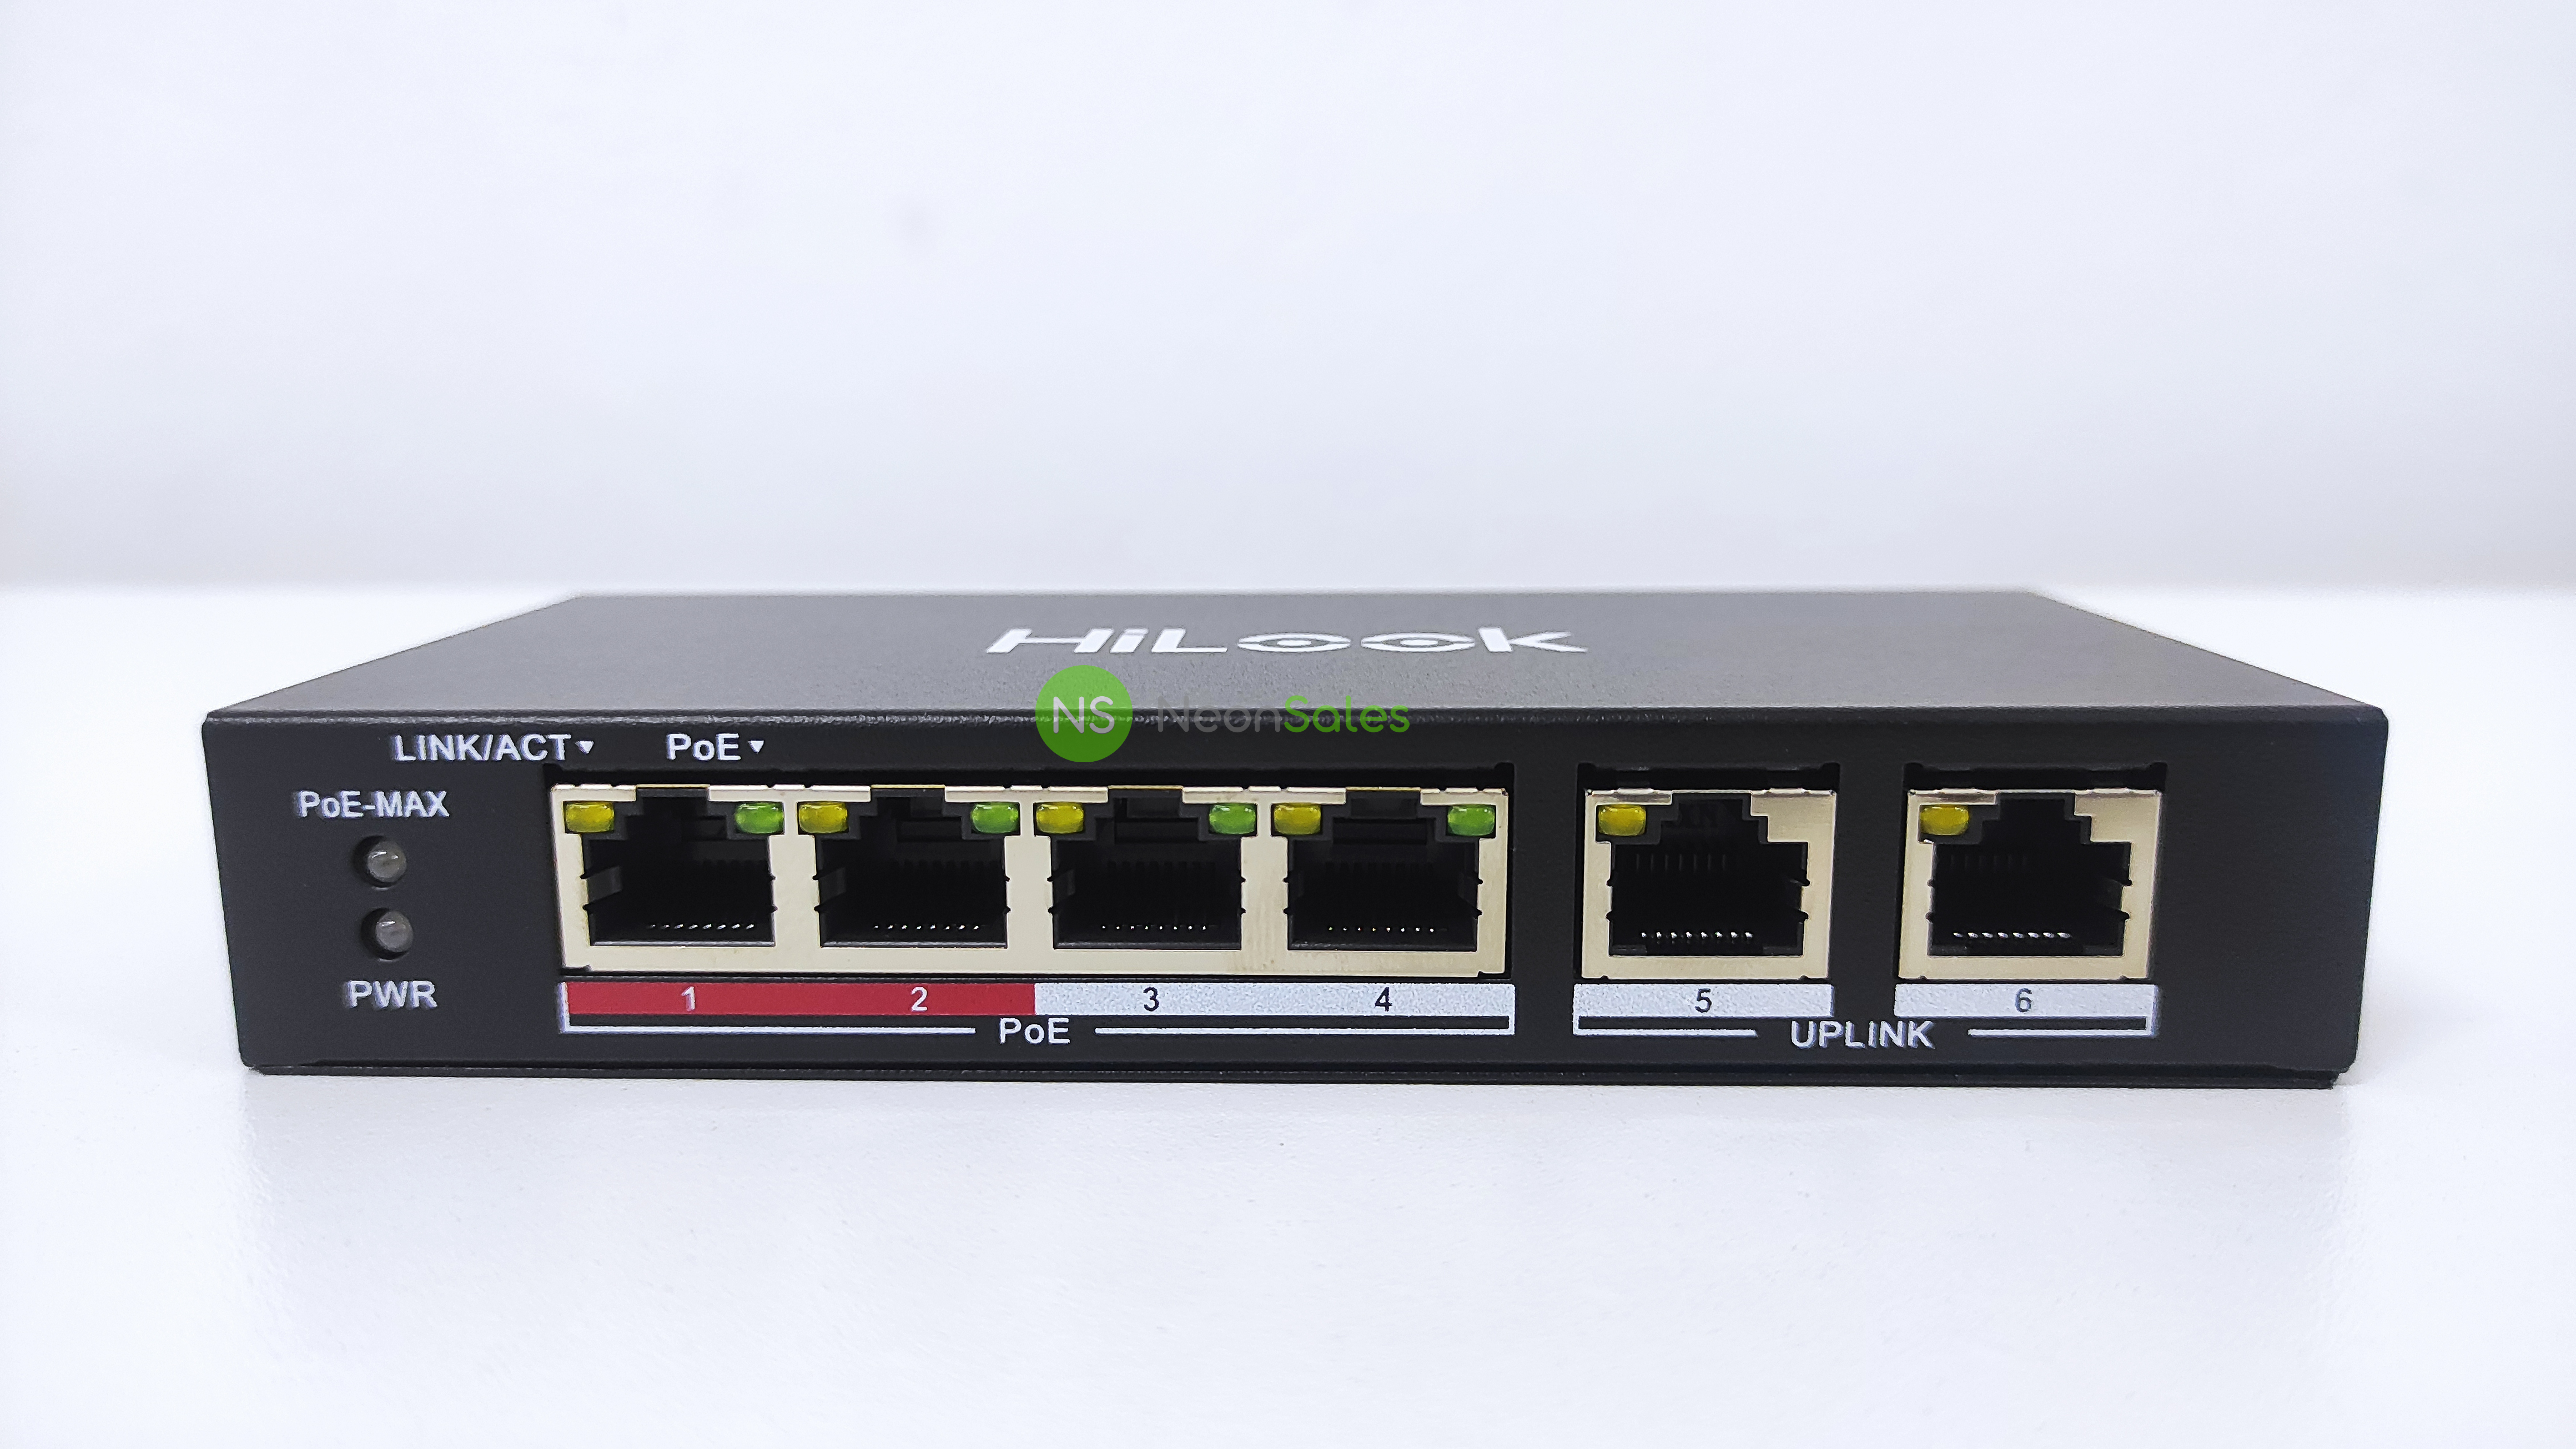 HILOOK 4 PORT POE SWITCH 10/100MBPS NS-0106P-35